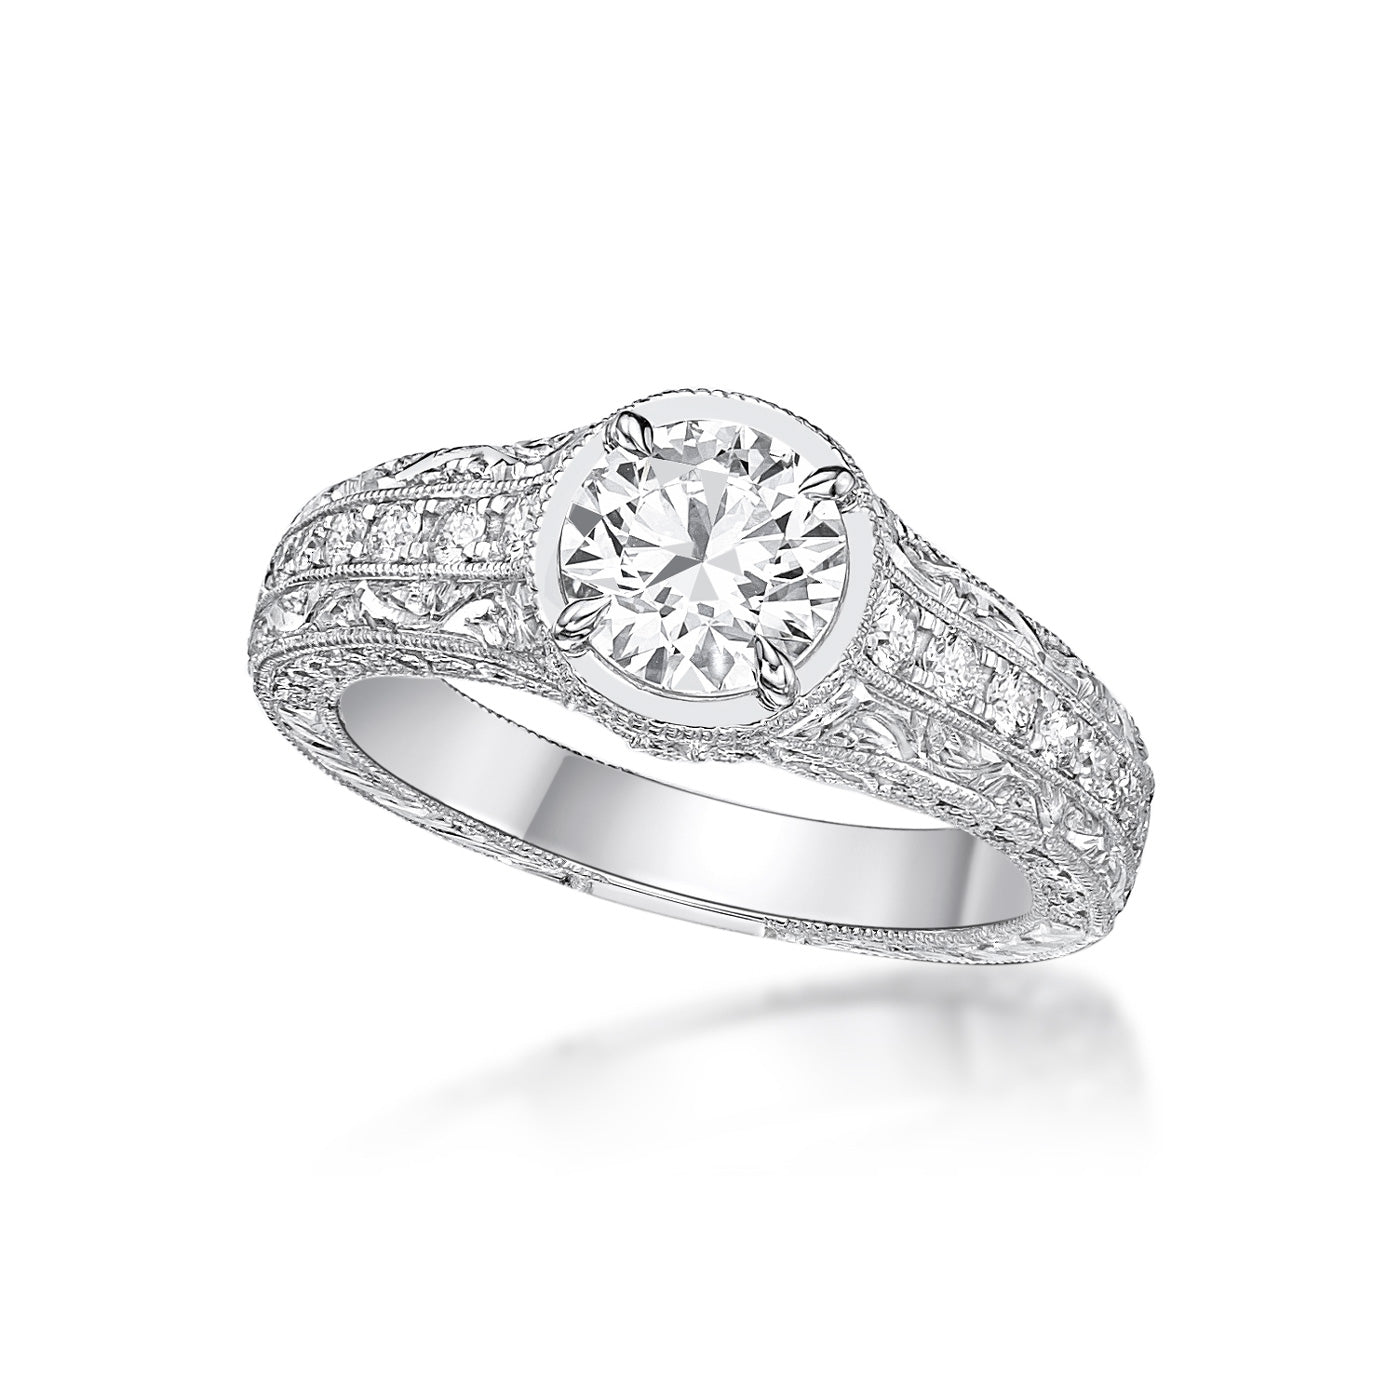 1.20ct Round Brilliant diamond set with four claws in a handmade 18K White Gold Vintage-style setting, custom milgrain band with micropave set diamonds and filigree detailing on side profile